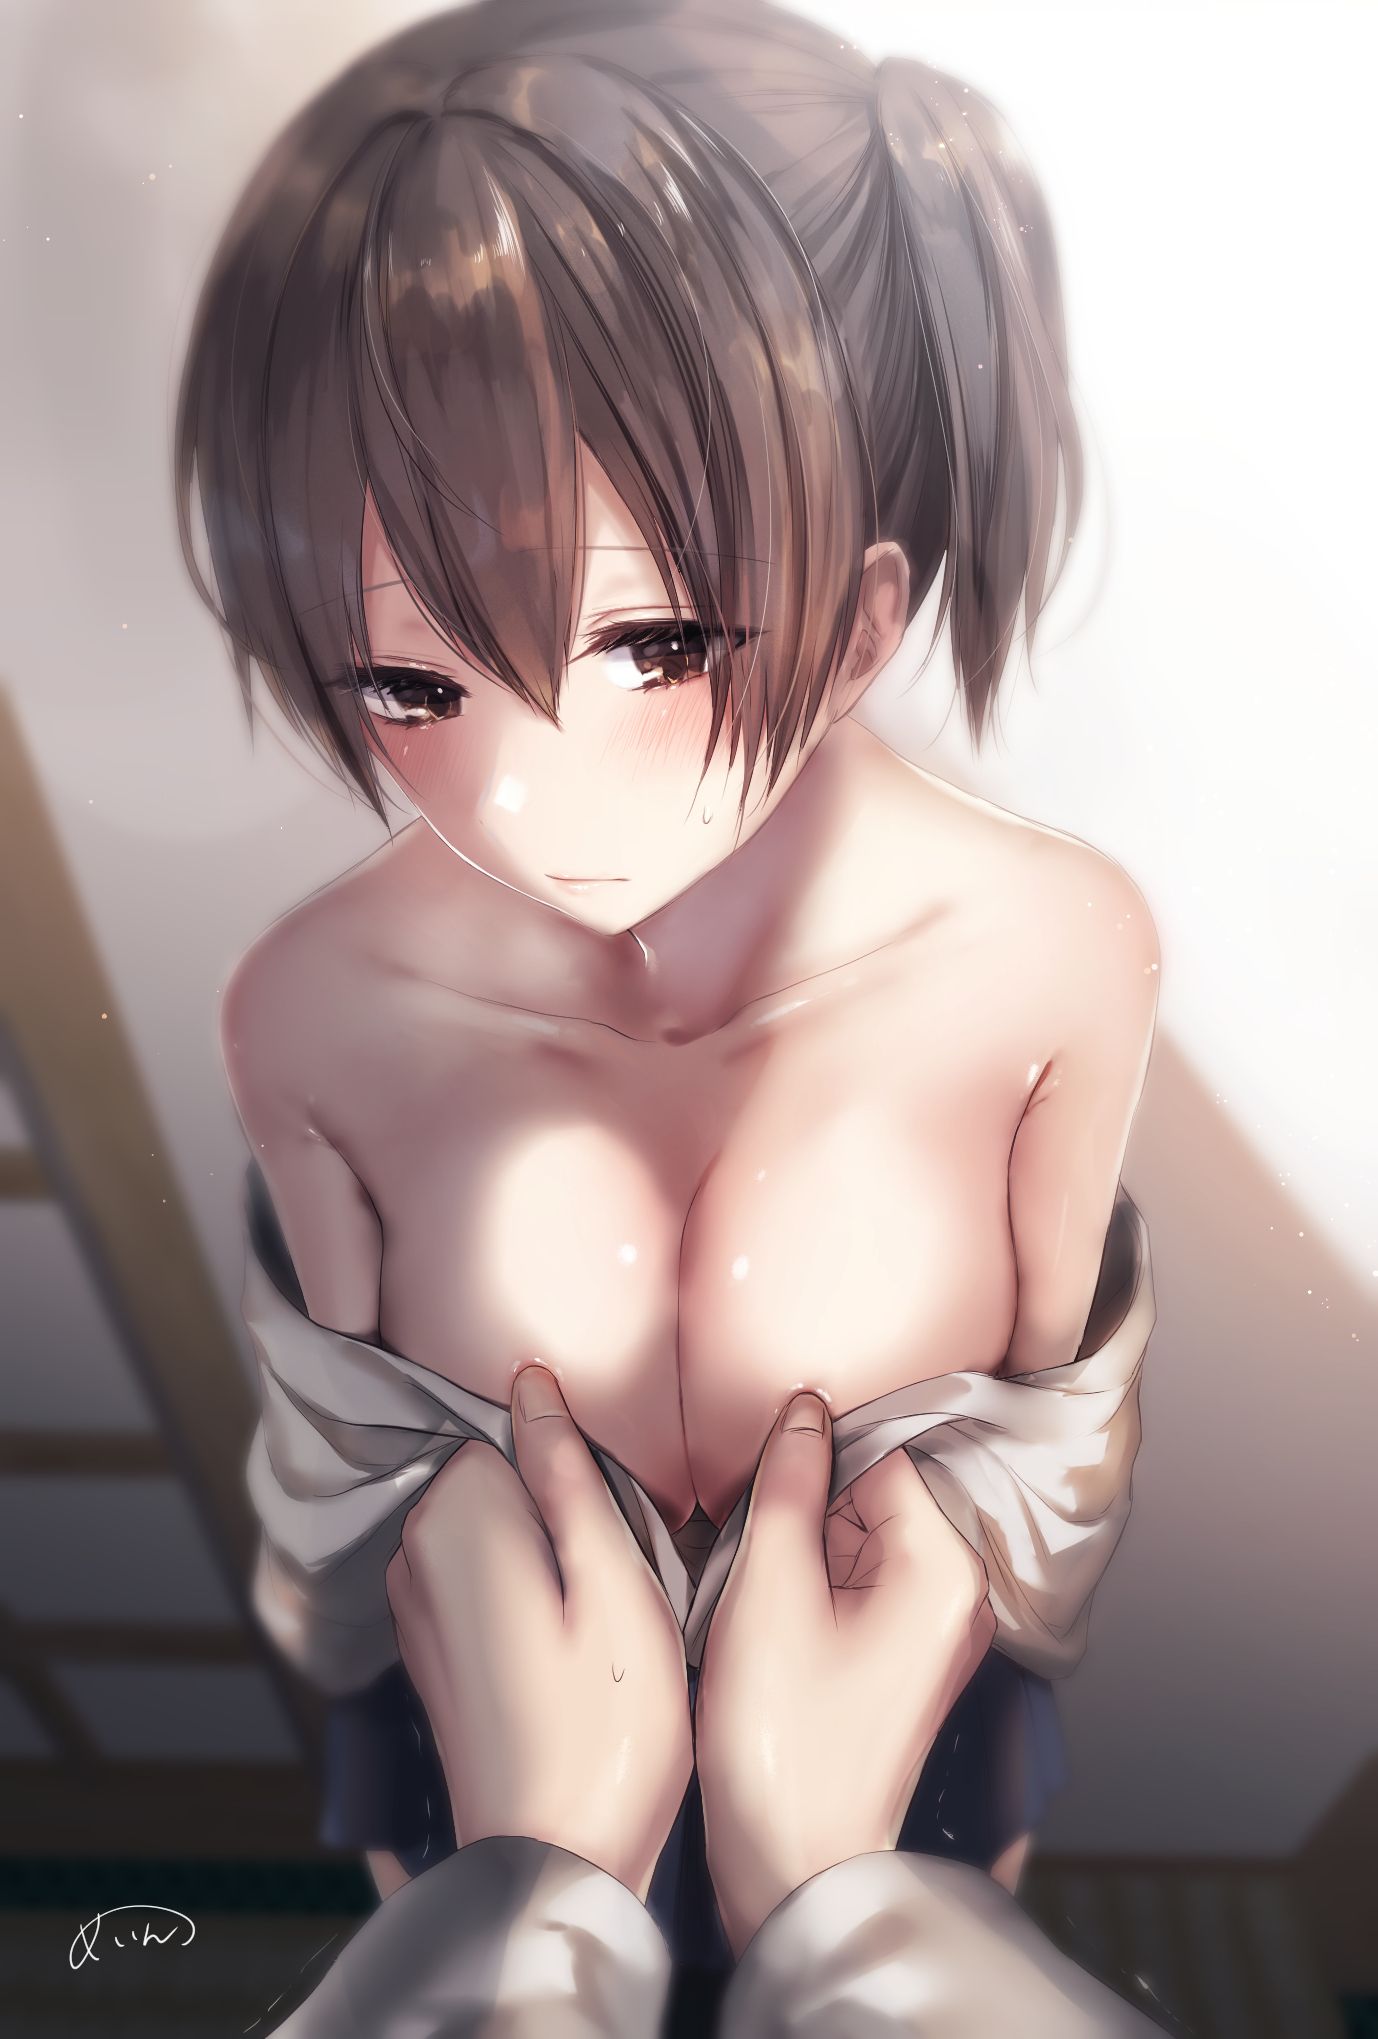 [Erotic anime summary] images collection of beautiful girls who are beautiful women with clothes taking off [50 sheets] 35